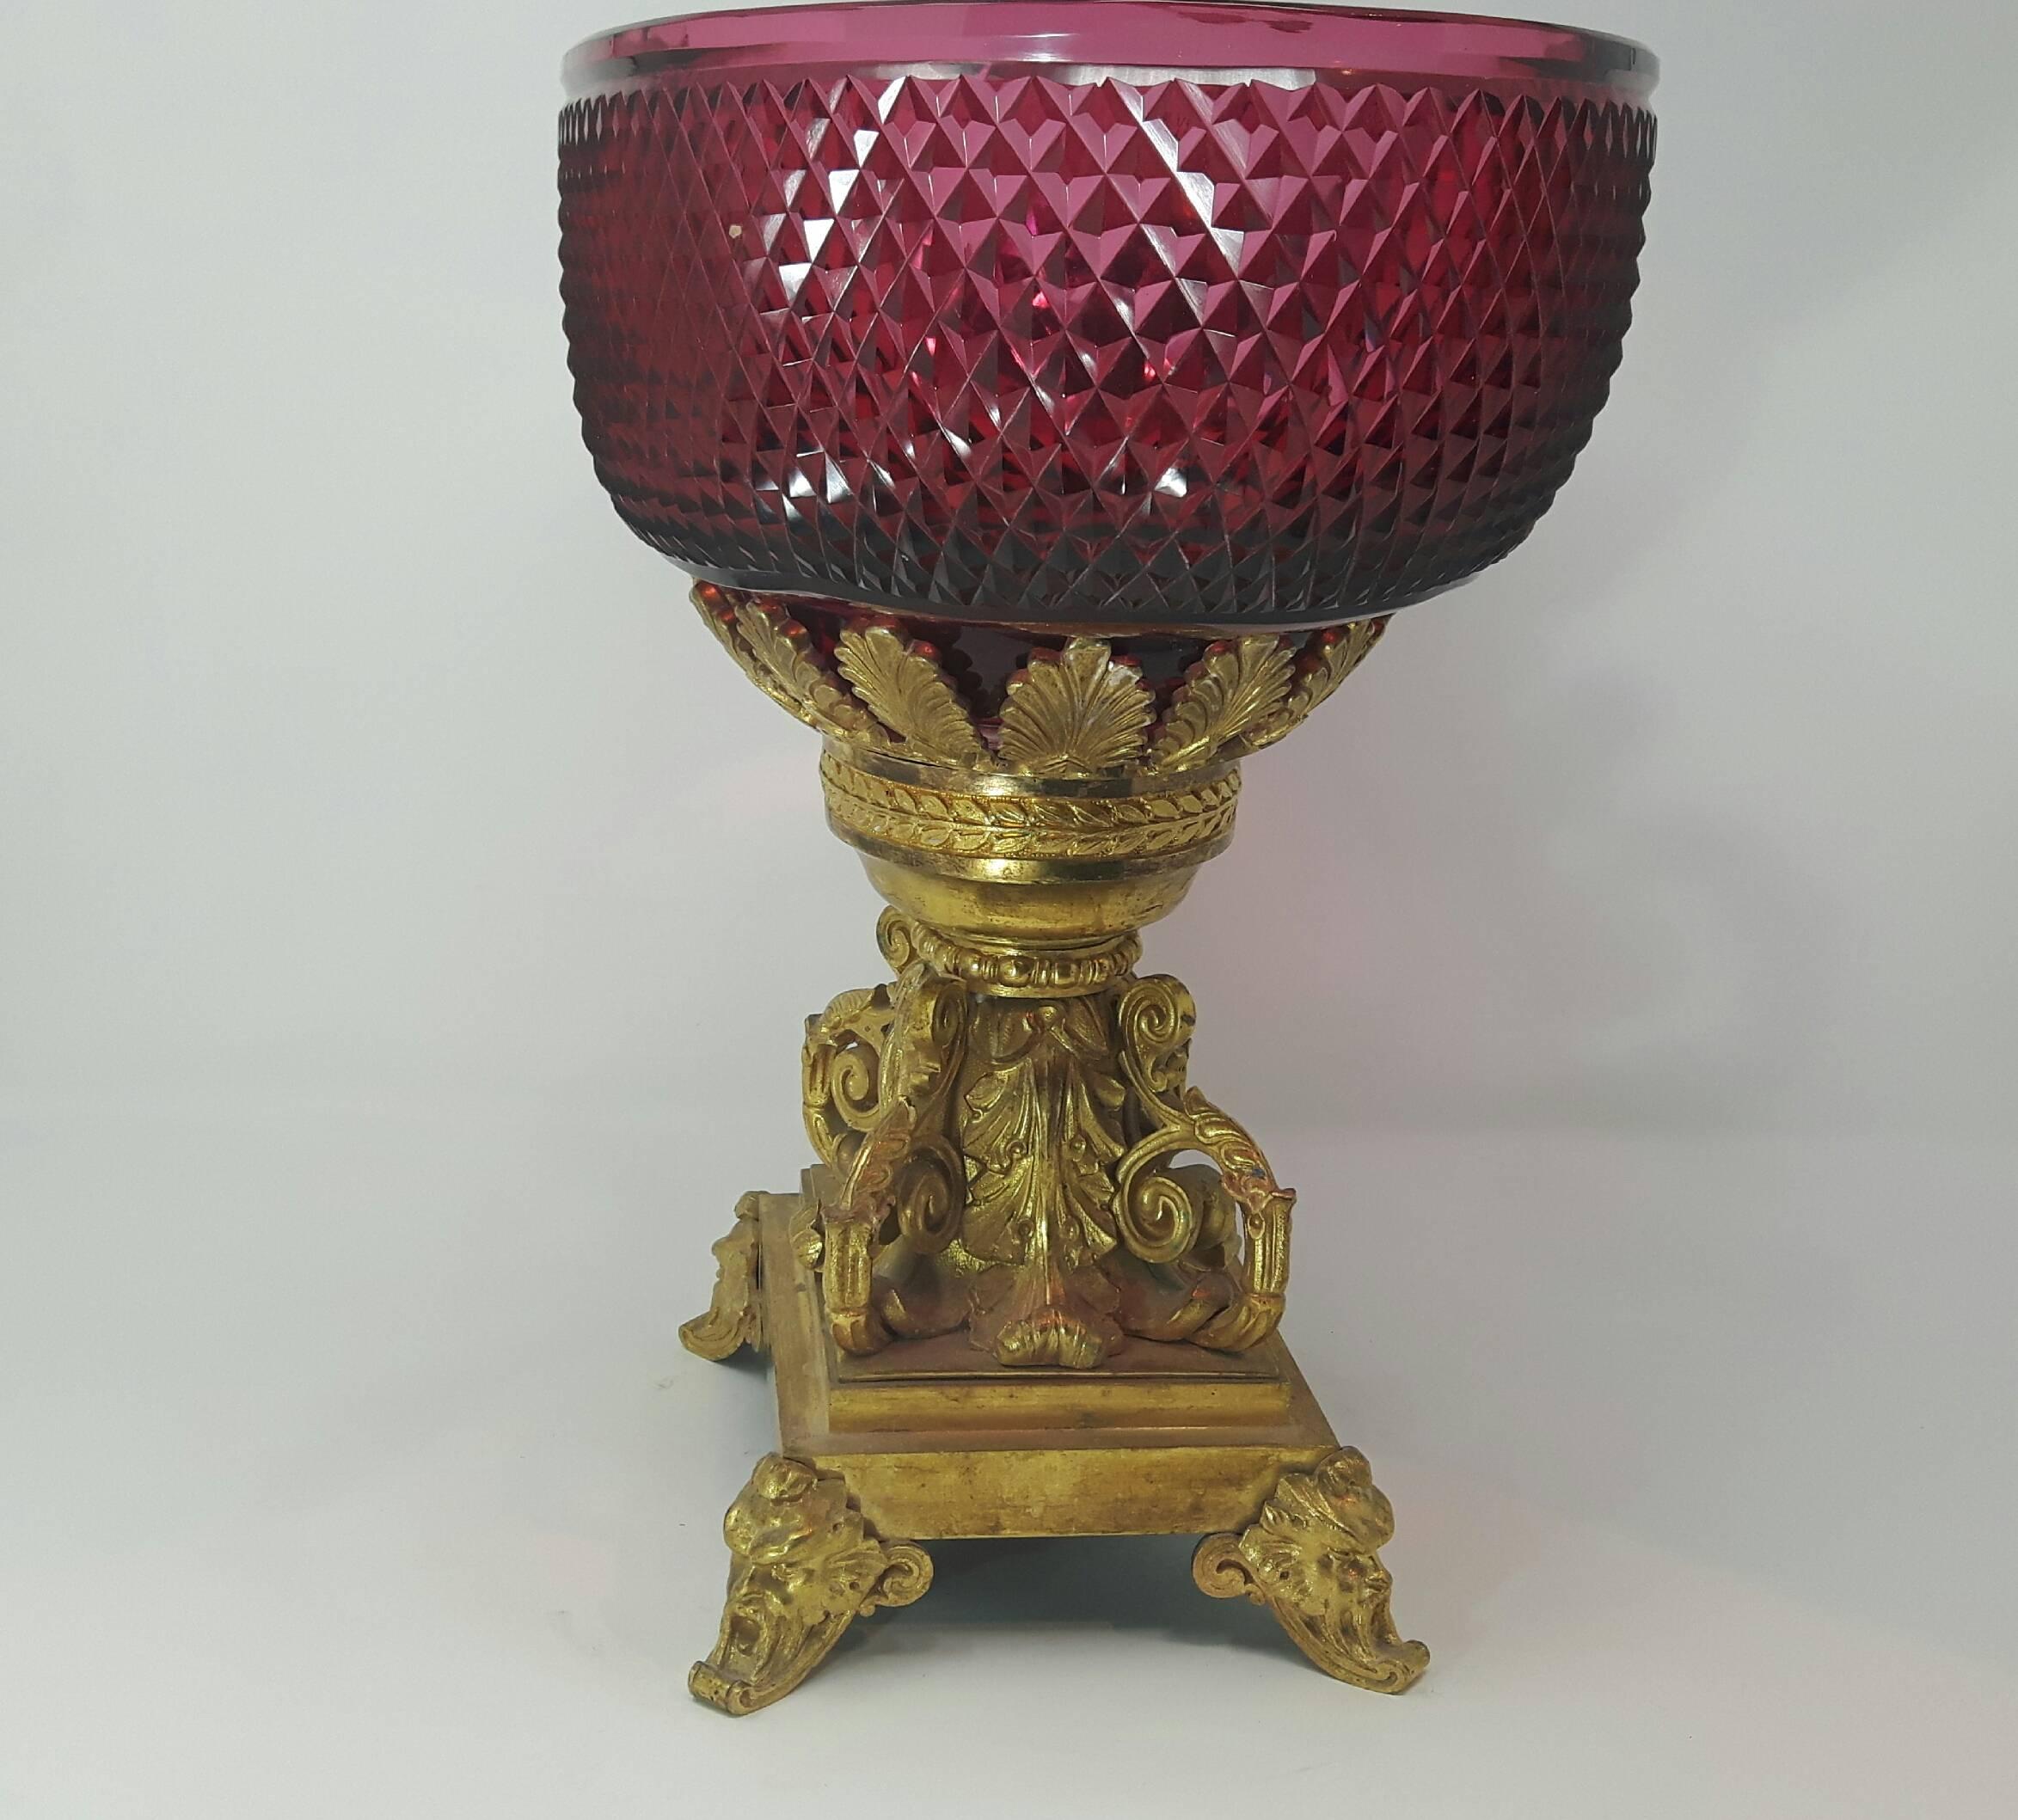 Antique French Cut Glass Centerpiece In Excellent Condition For Sale In London, GB